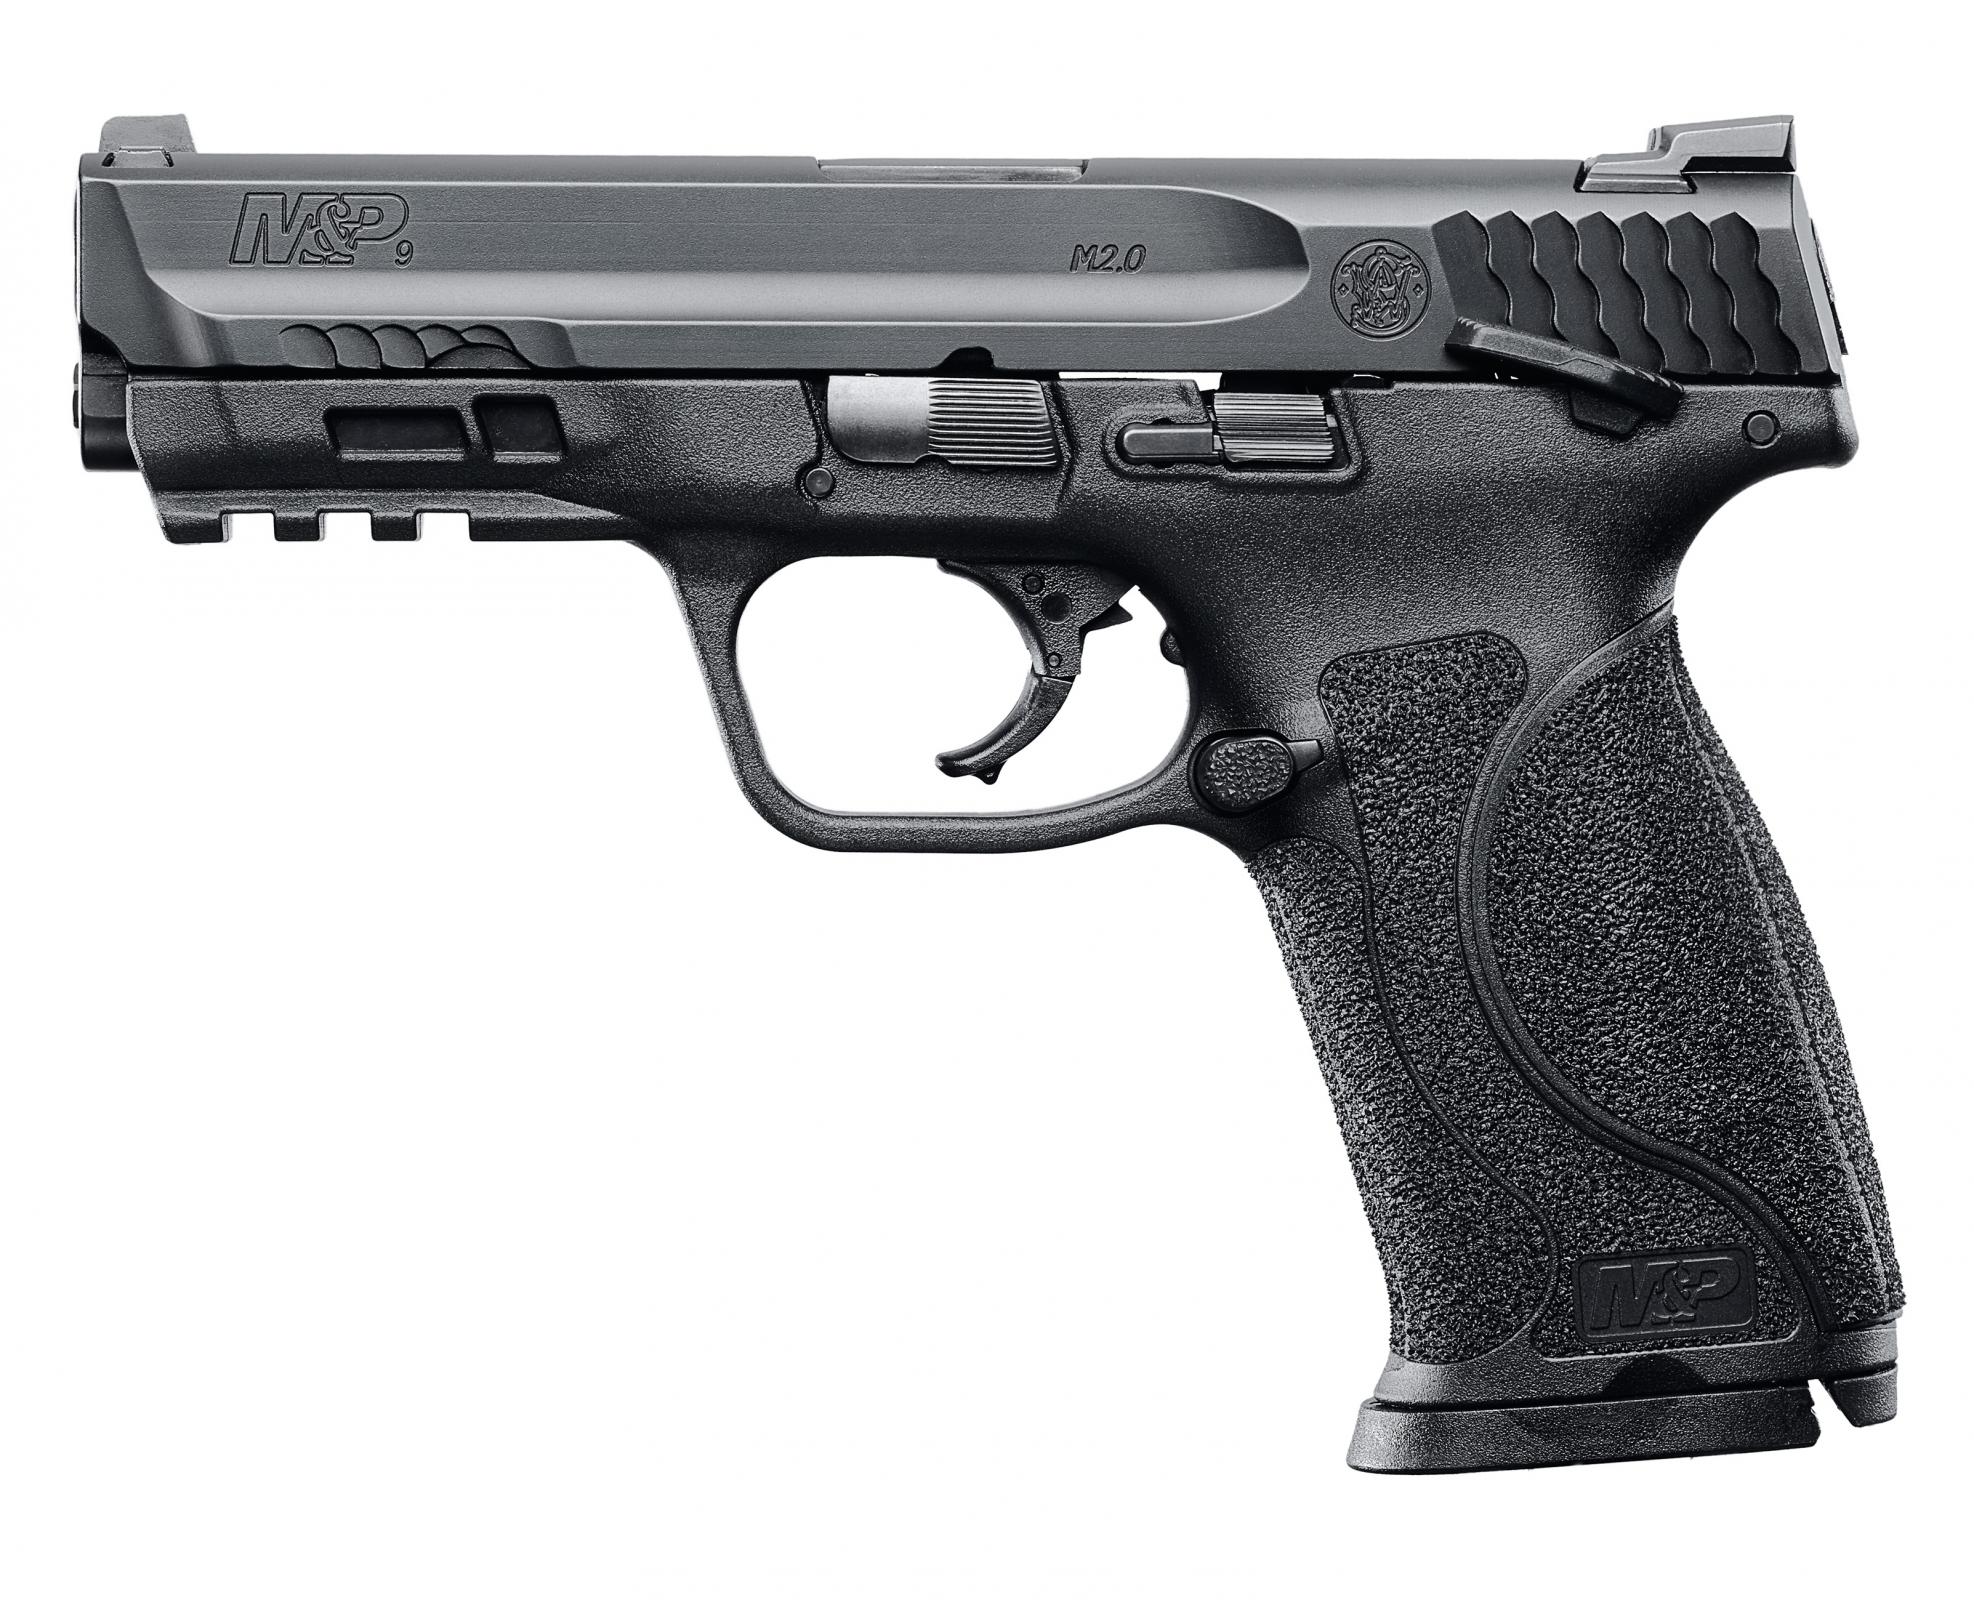 Smith & Wesson M&P9 M2.0 9mm Pistol 4.25″ Barrel, Manual Thumb Safety, Black (11524)